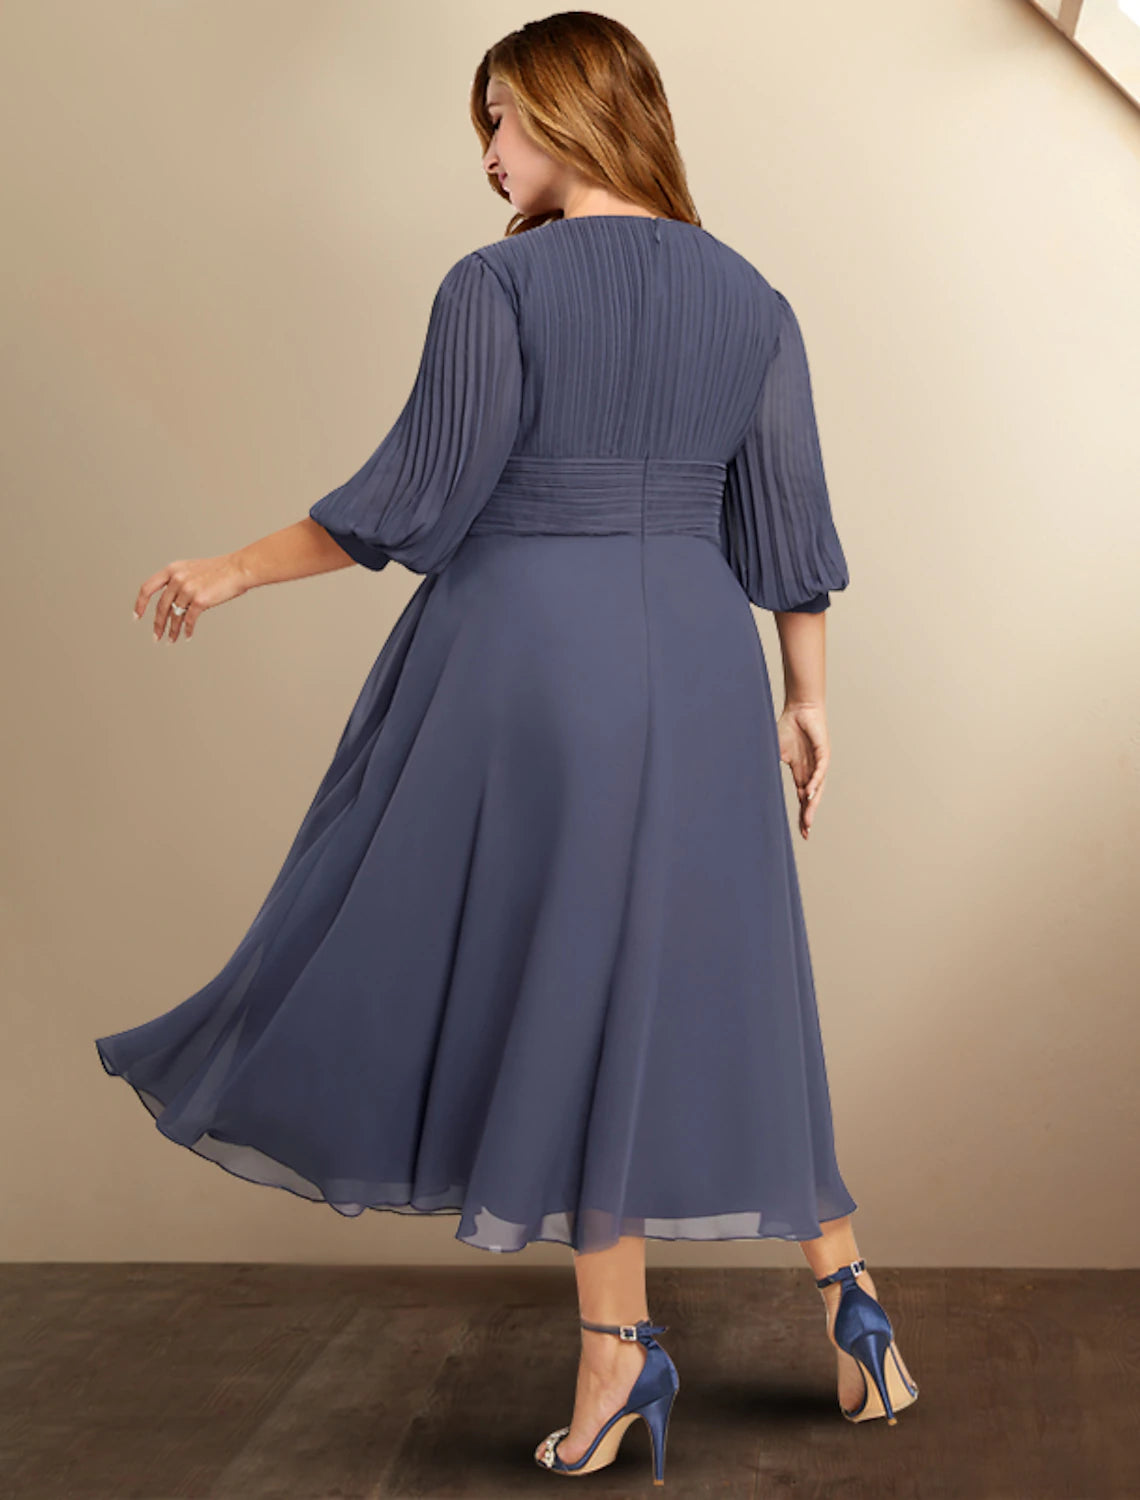 A-Line Mother of the Bride Dresses Plus Size Hide Belly Curve Elegant Dress Formal Tea Length Half Sleeve V Neck Chiffon with Pleats Ruched Fall